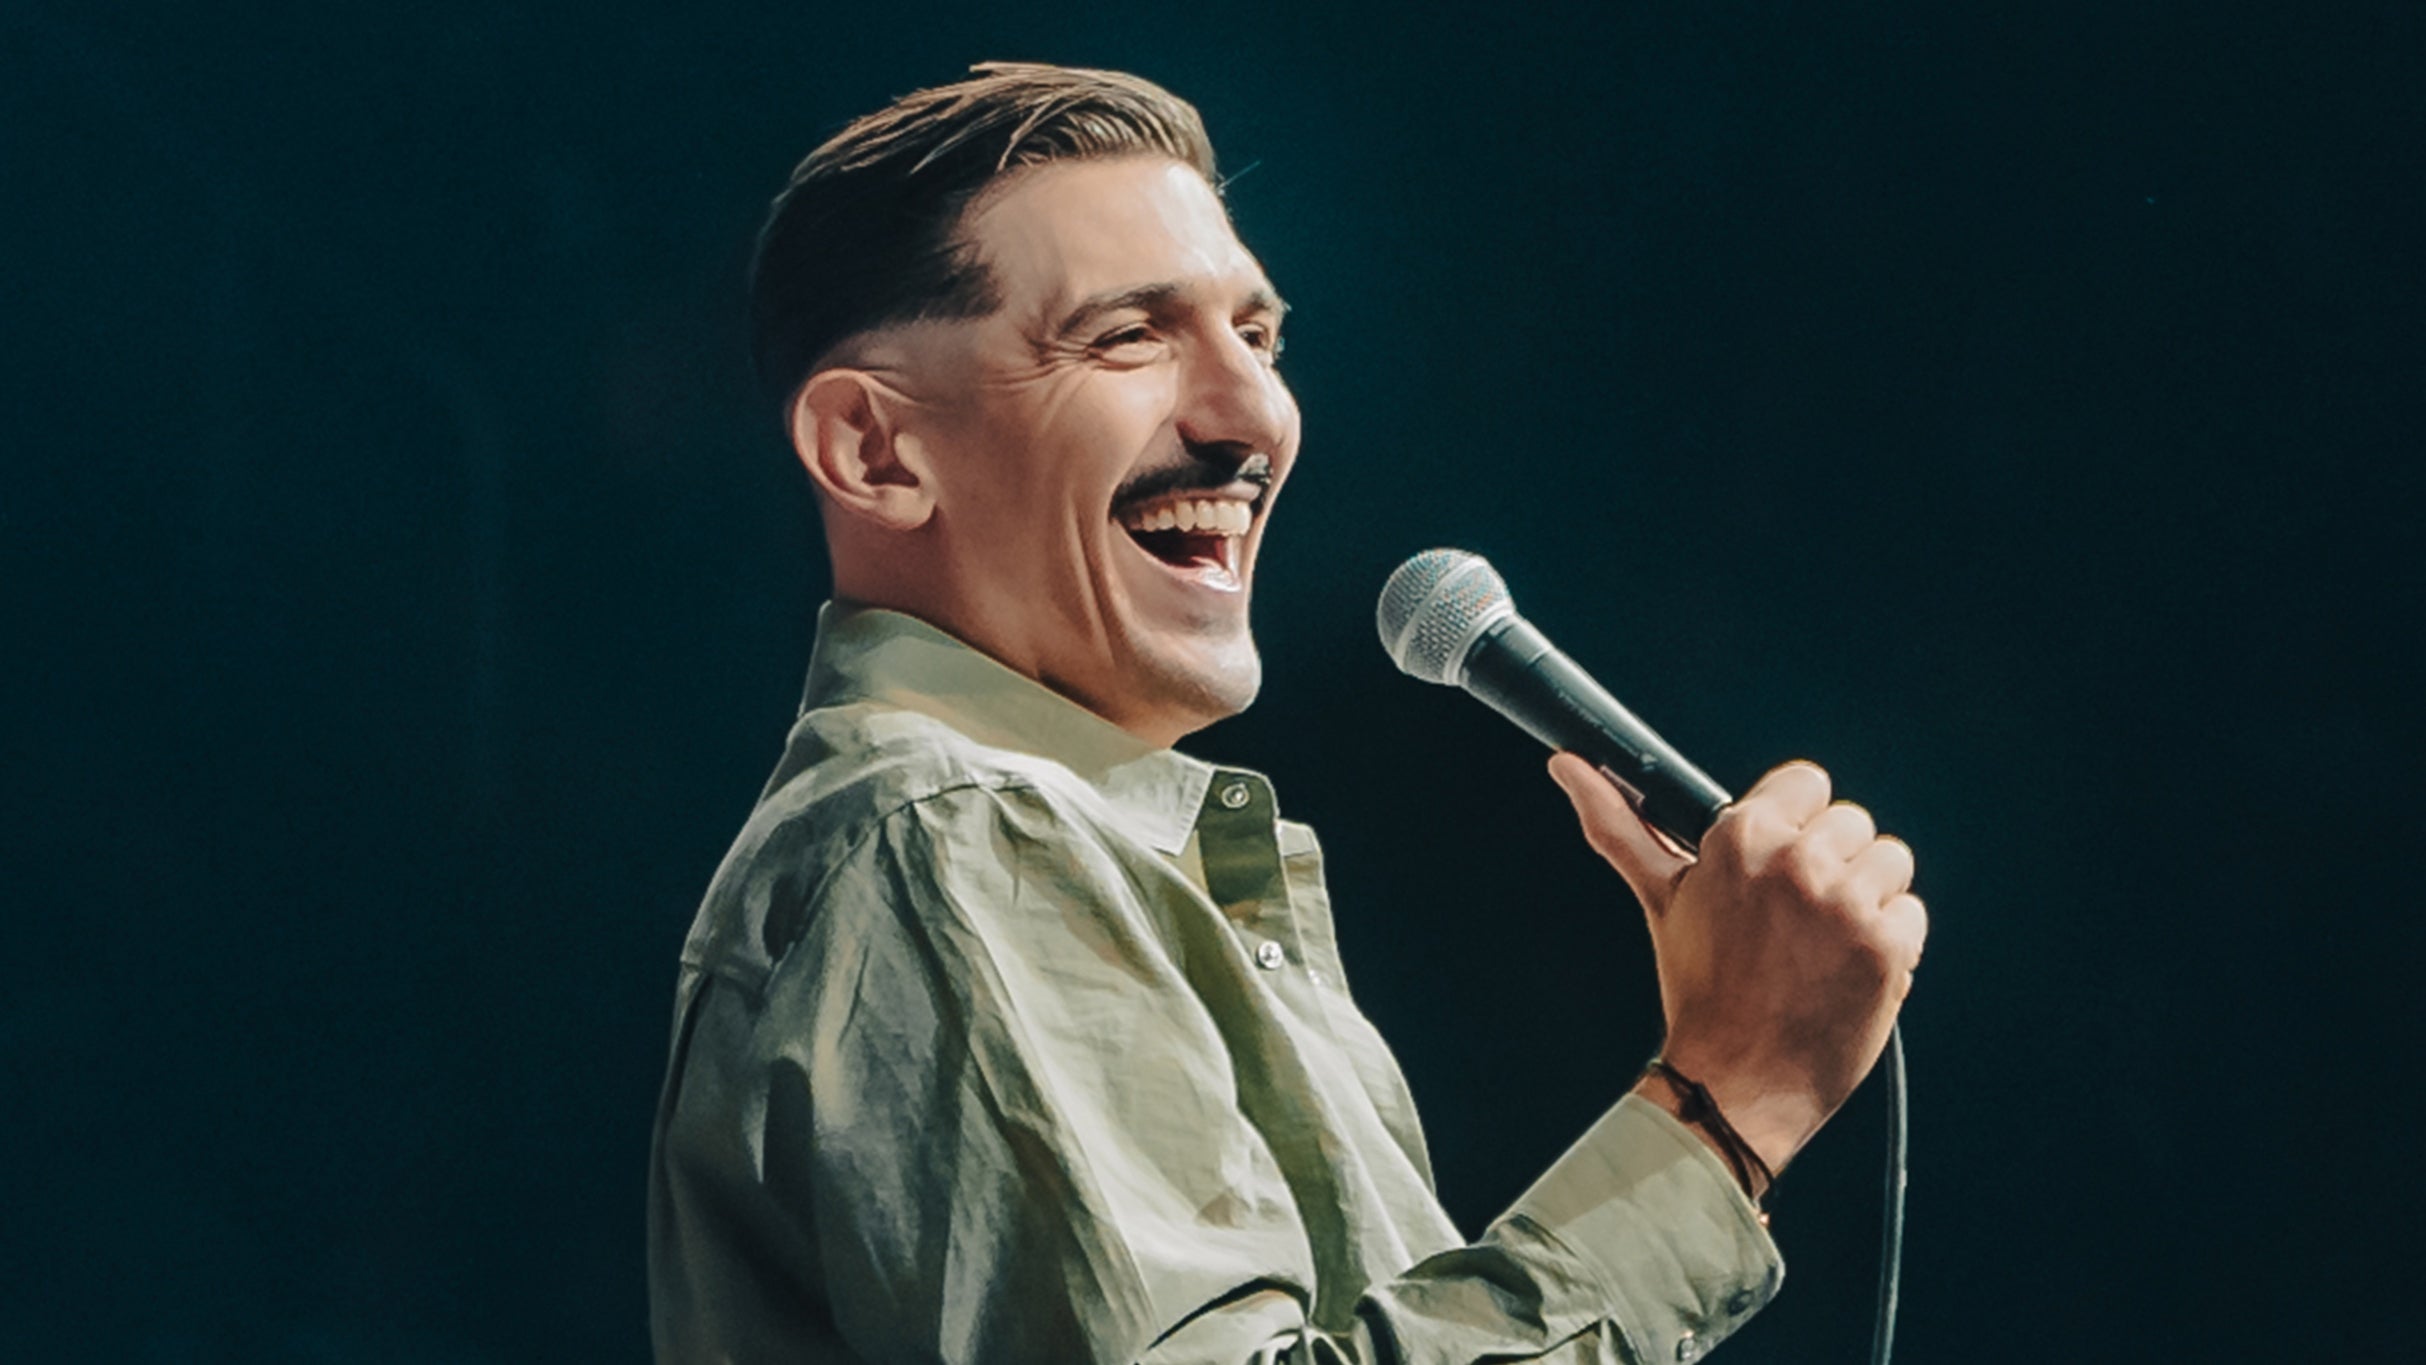 Andrew Schulz: The Life Tour at The Masonic